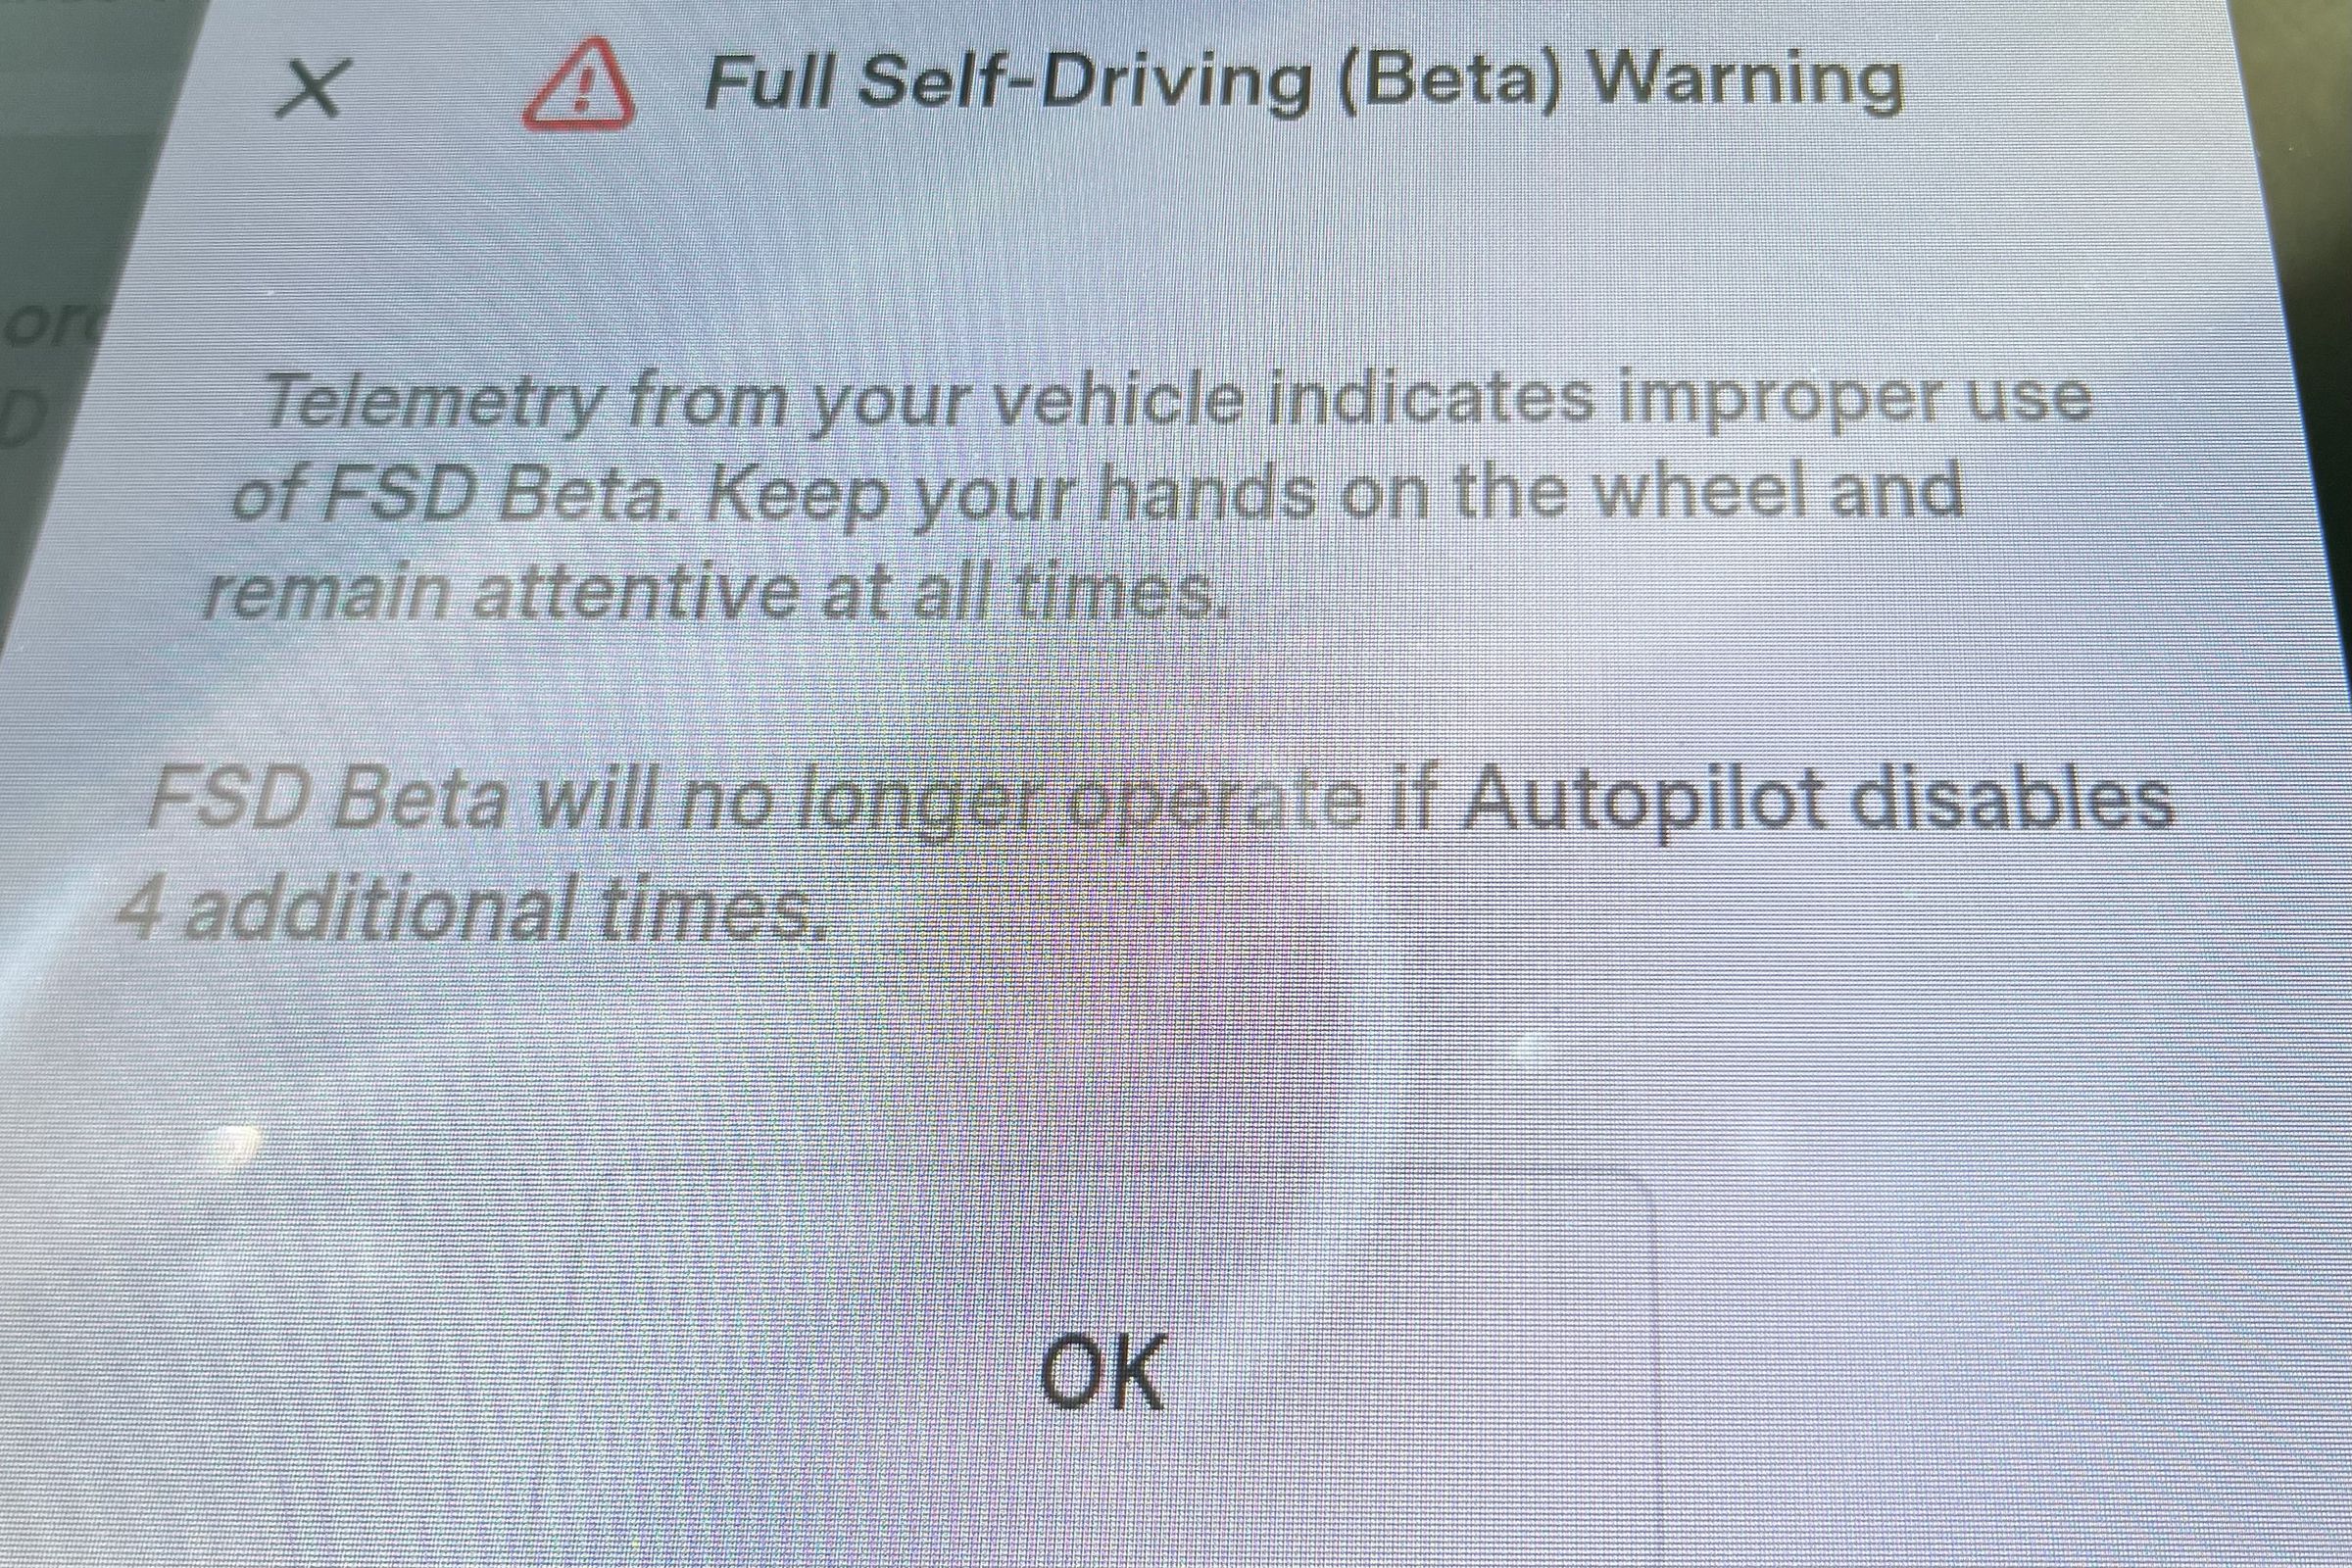 You could lose your FSD privileges if Tesla Vision thinks you’re not paying attention.